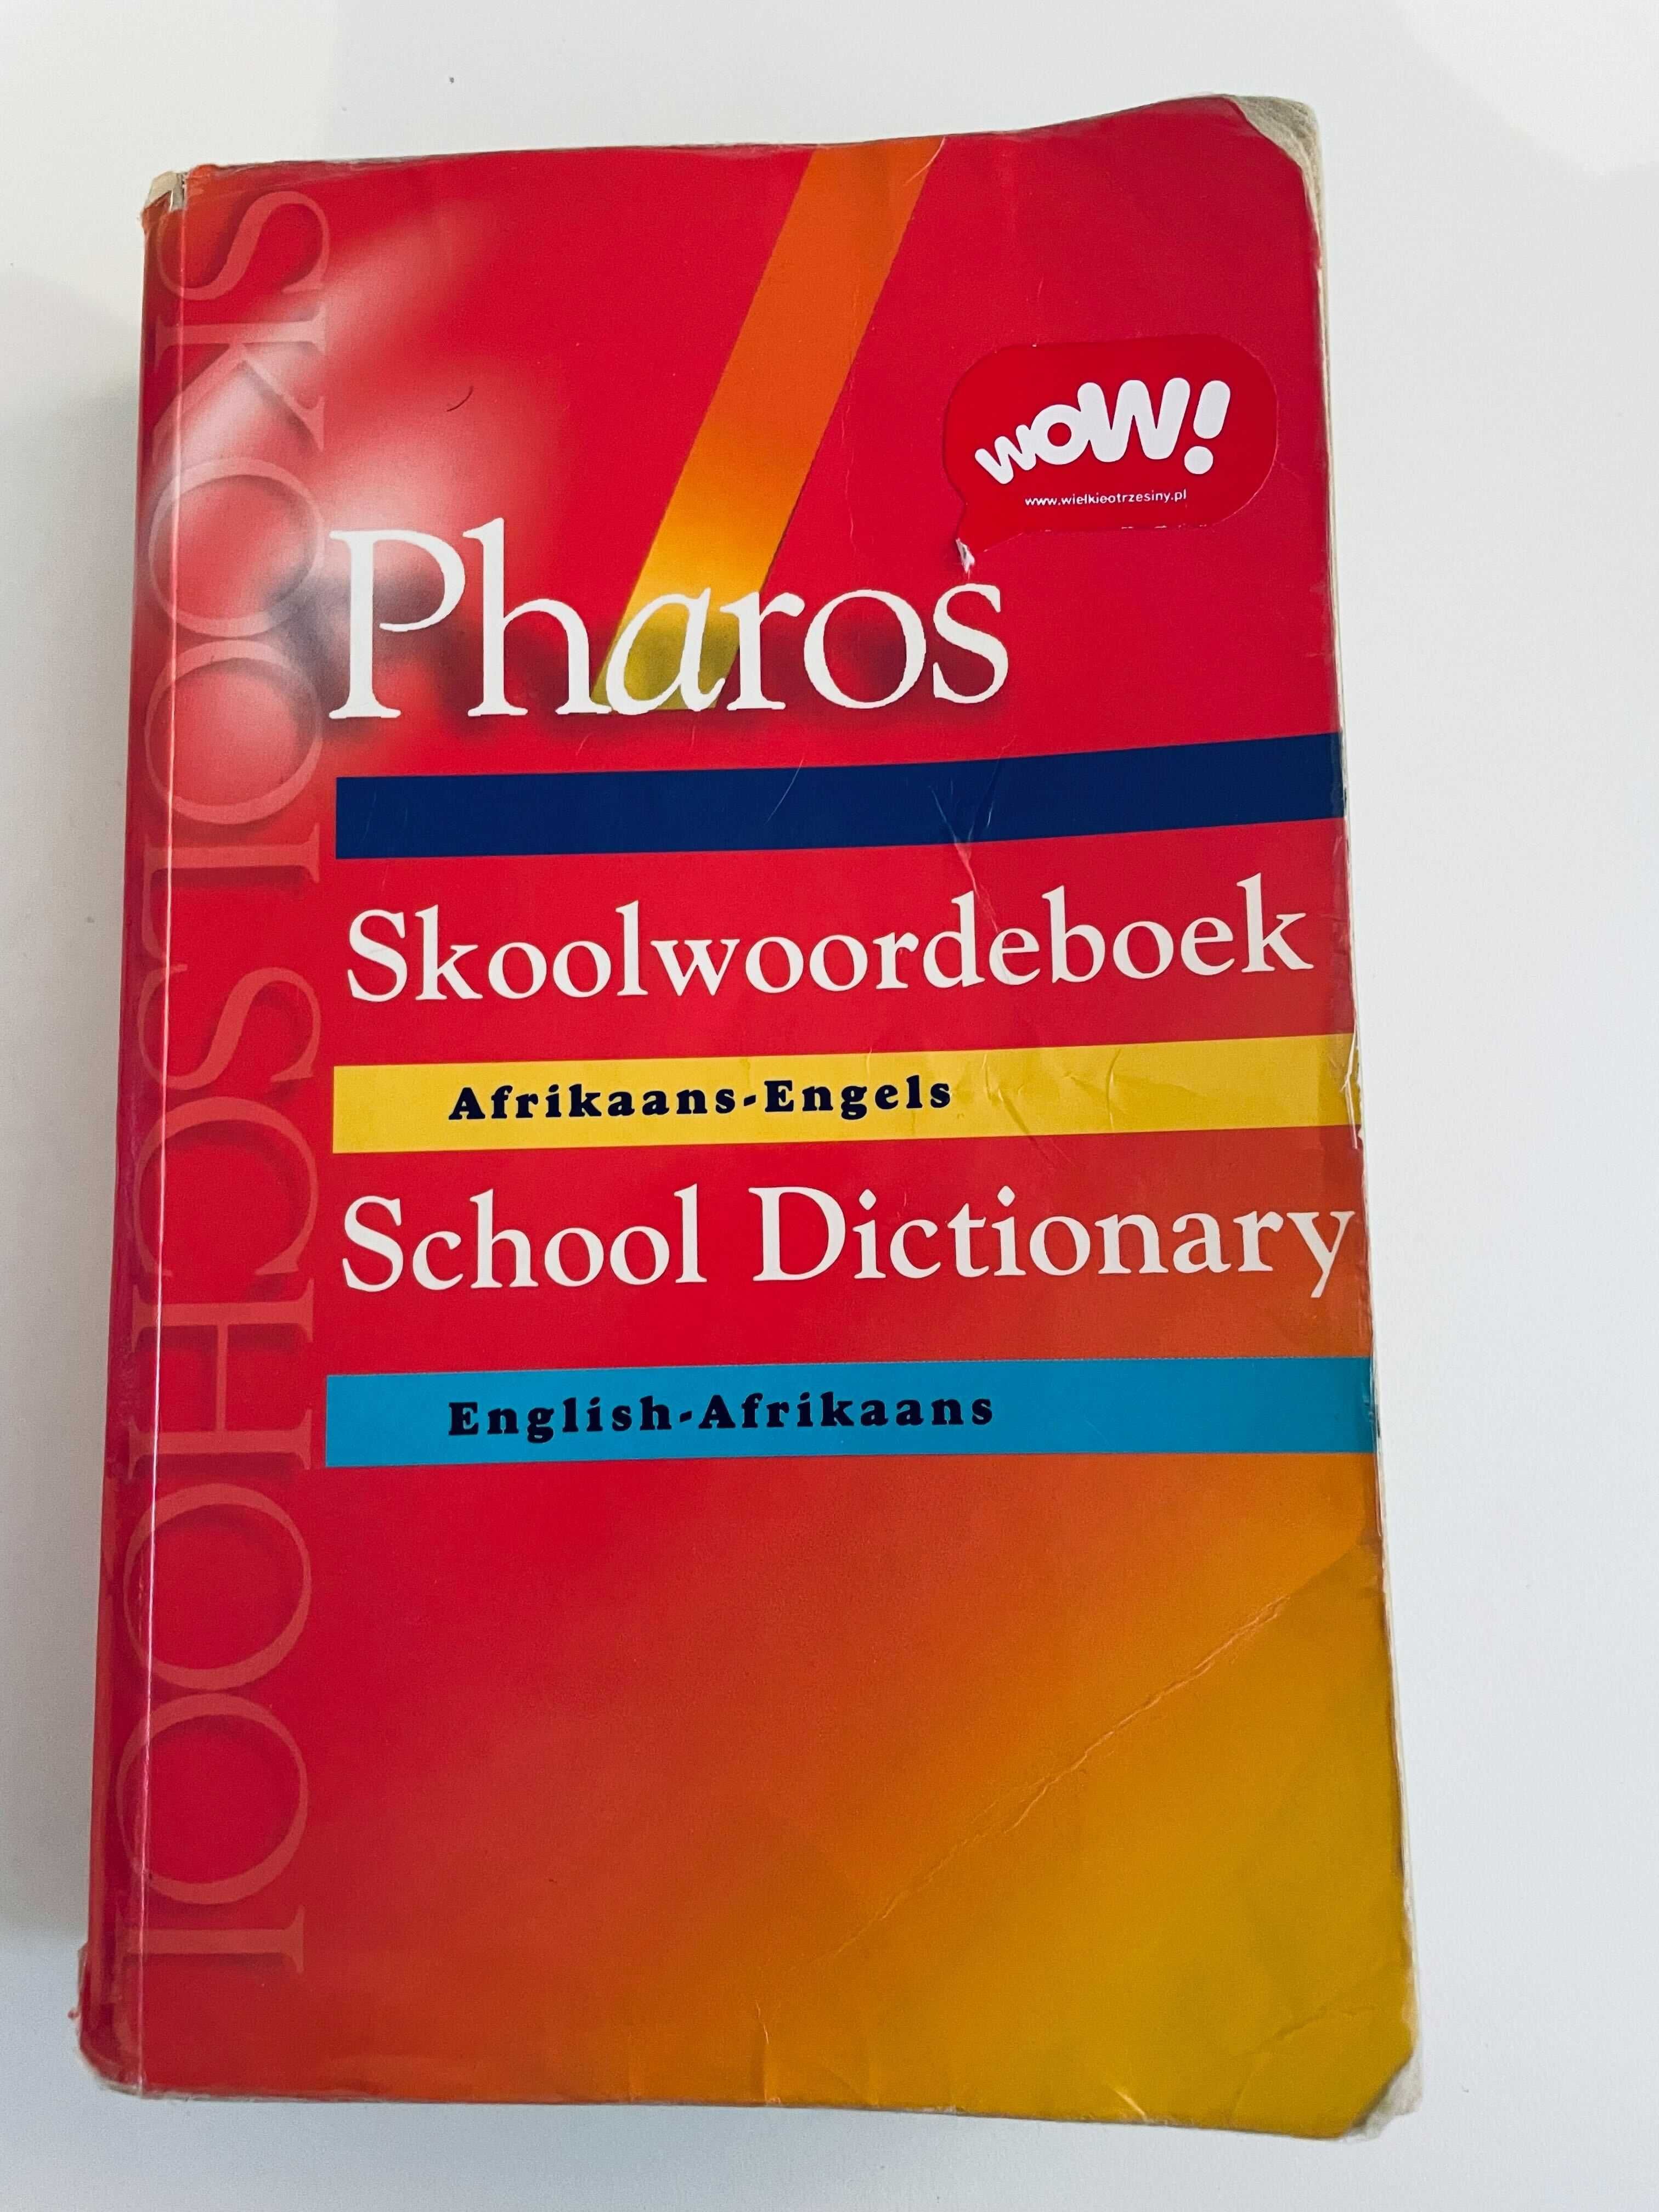 English-Afrikaans / Afrikaans-English dictionary